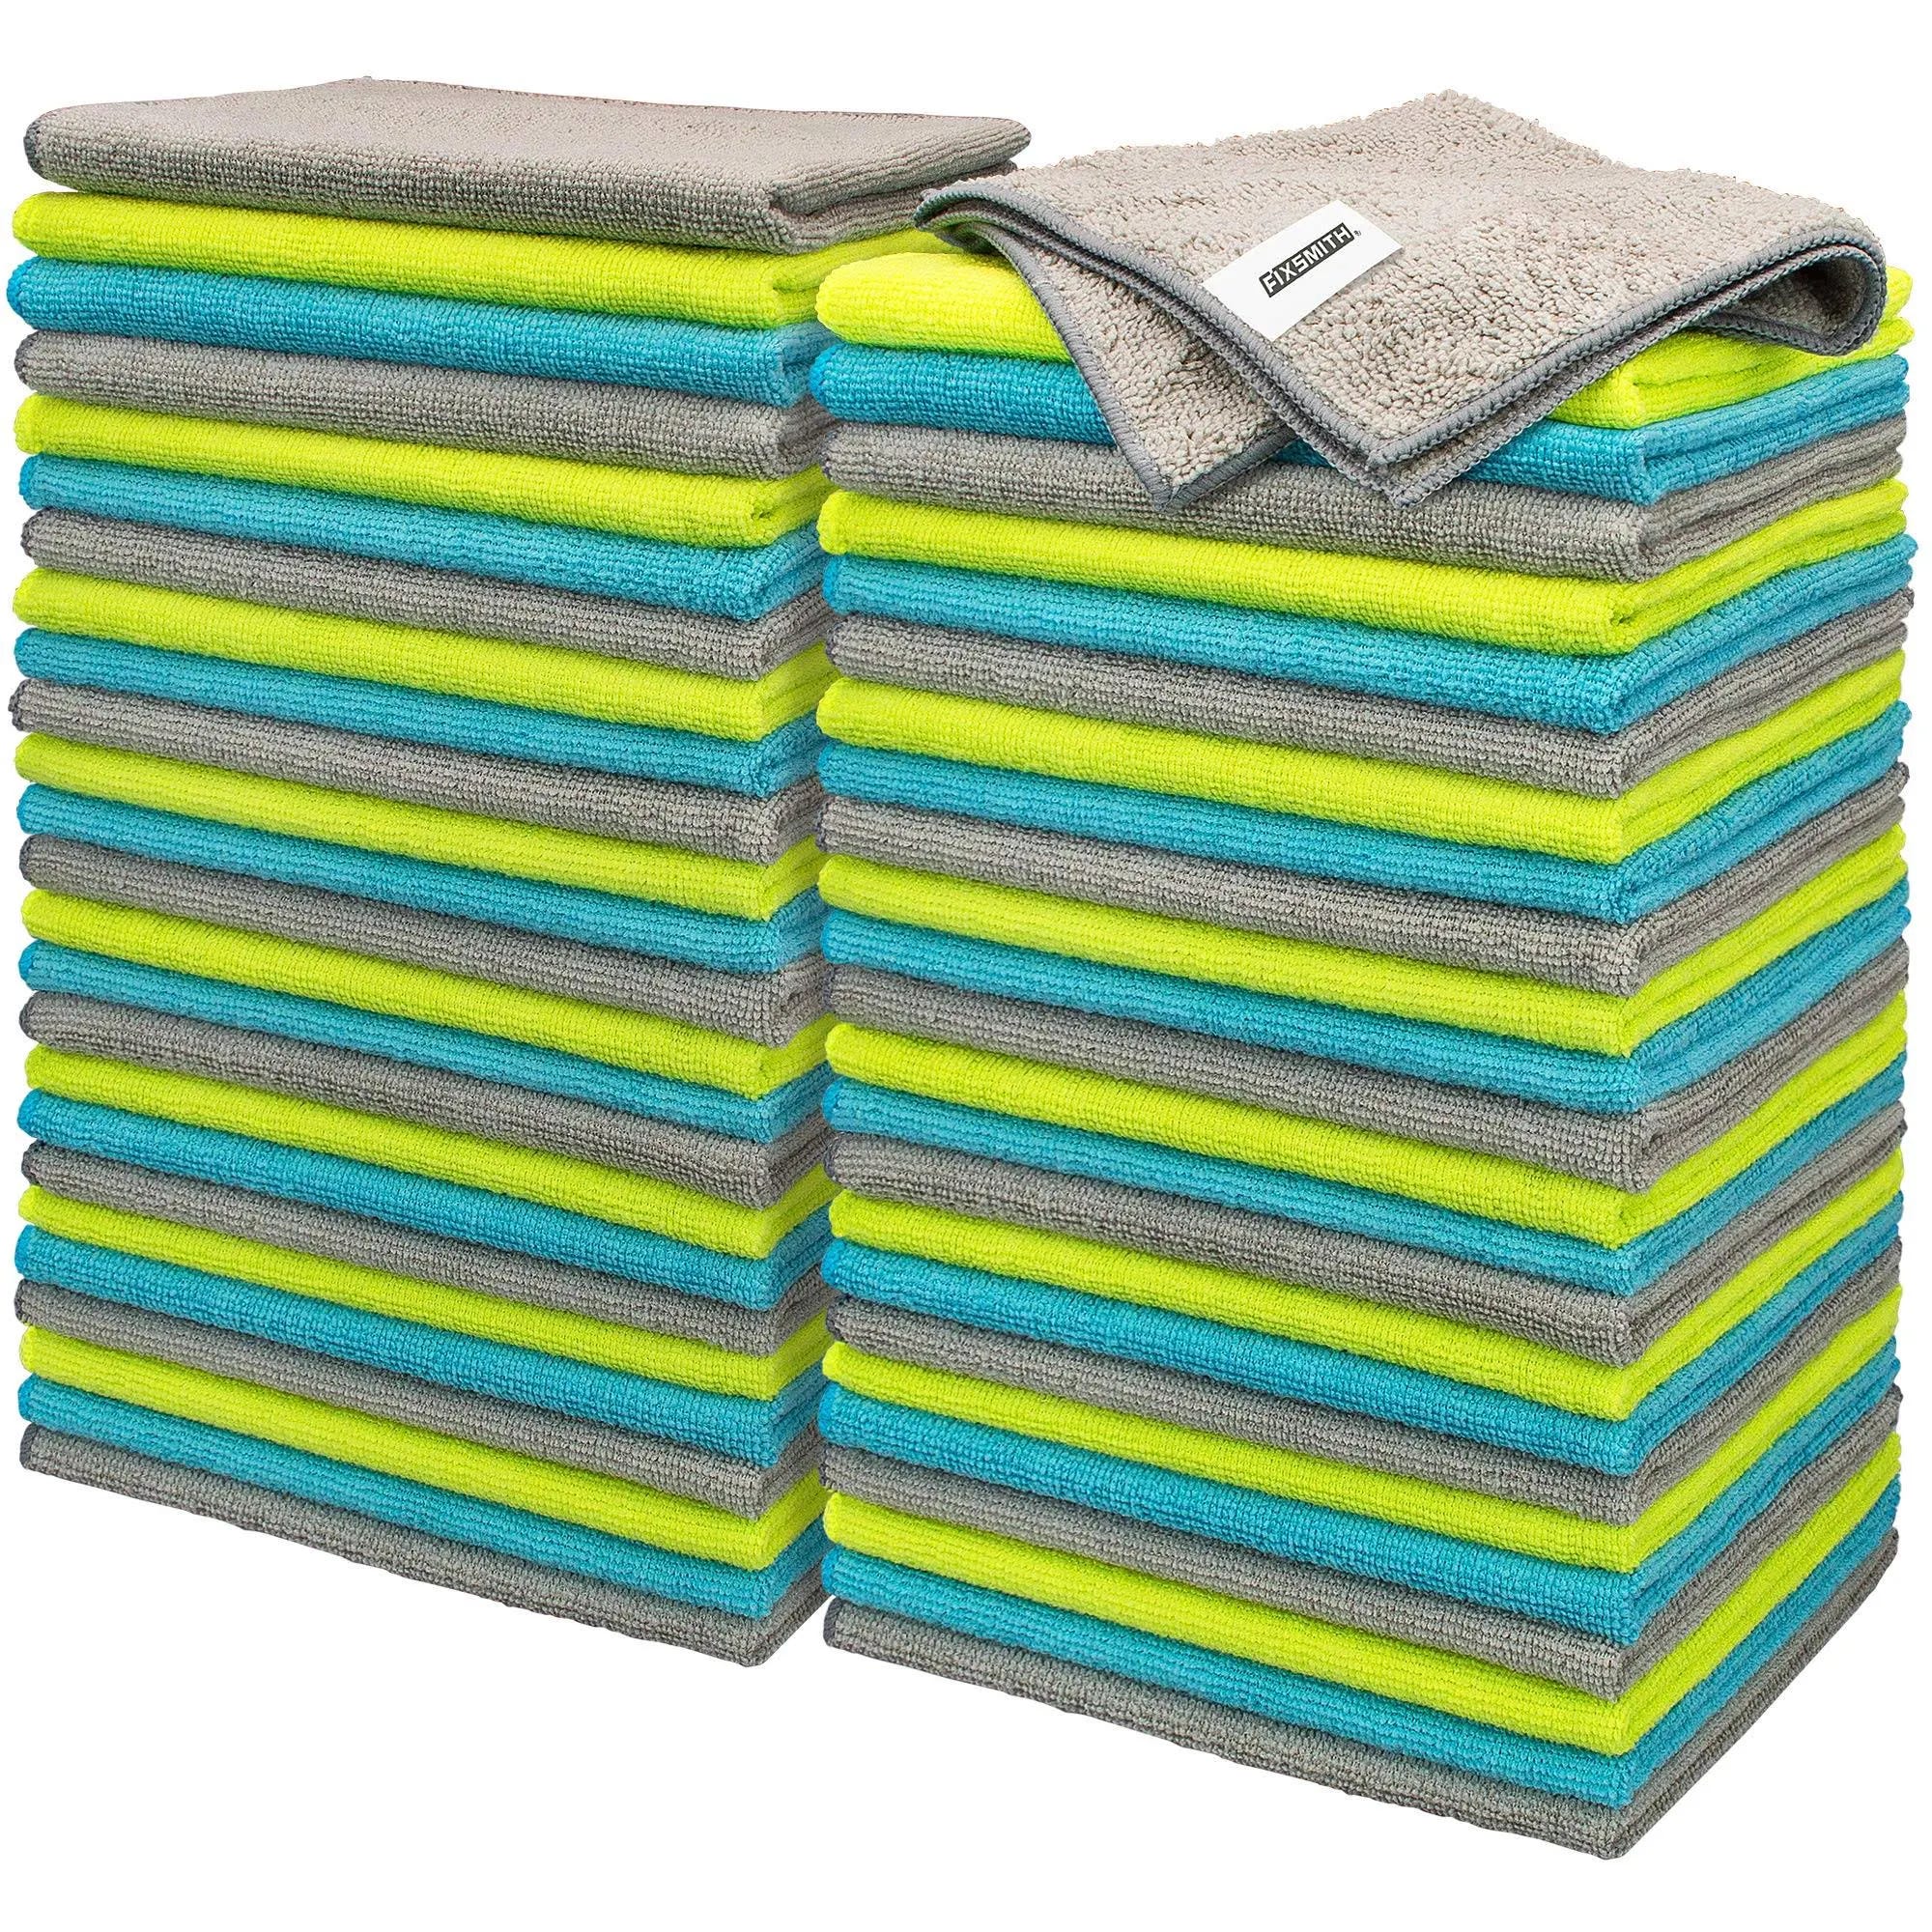 Multi-functional Microfiber Cleaning Towels for All Surfaces | Image